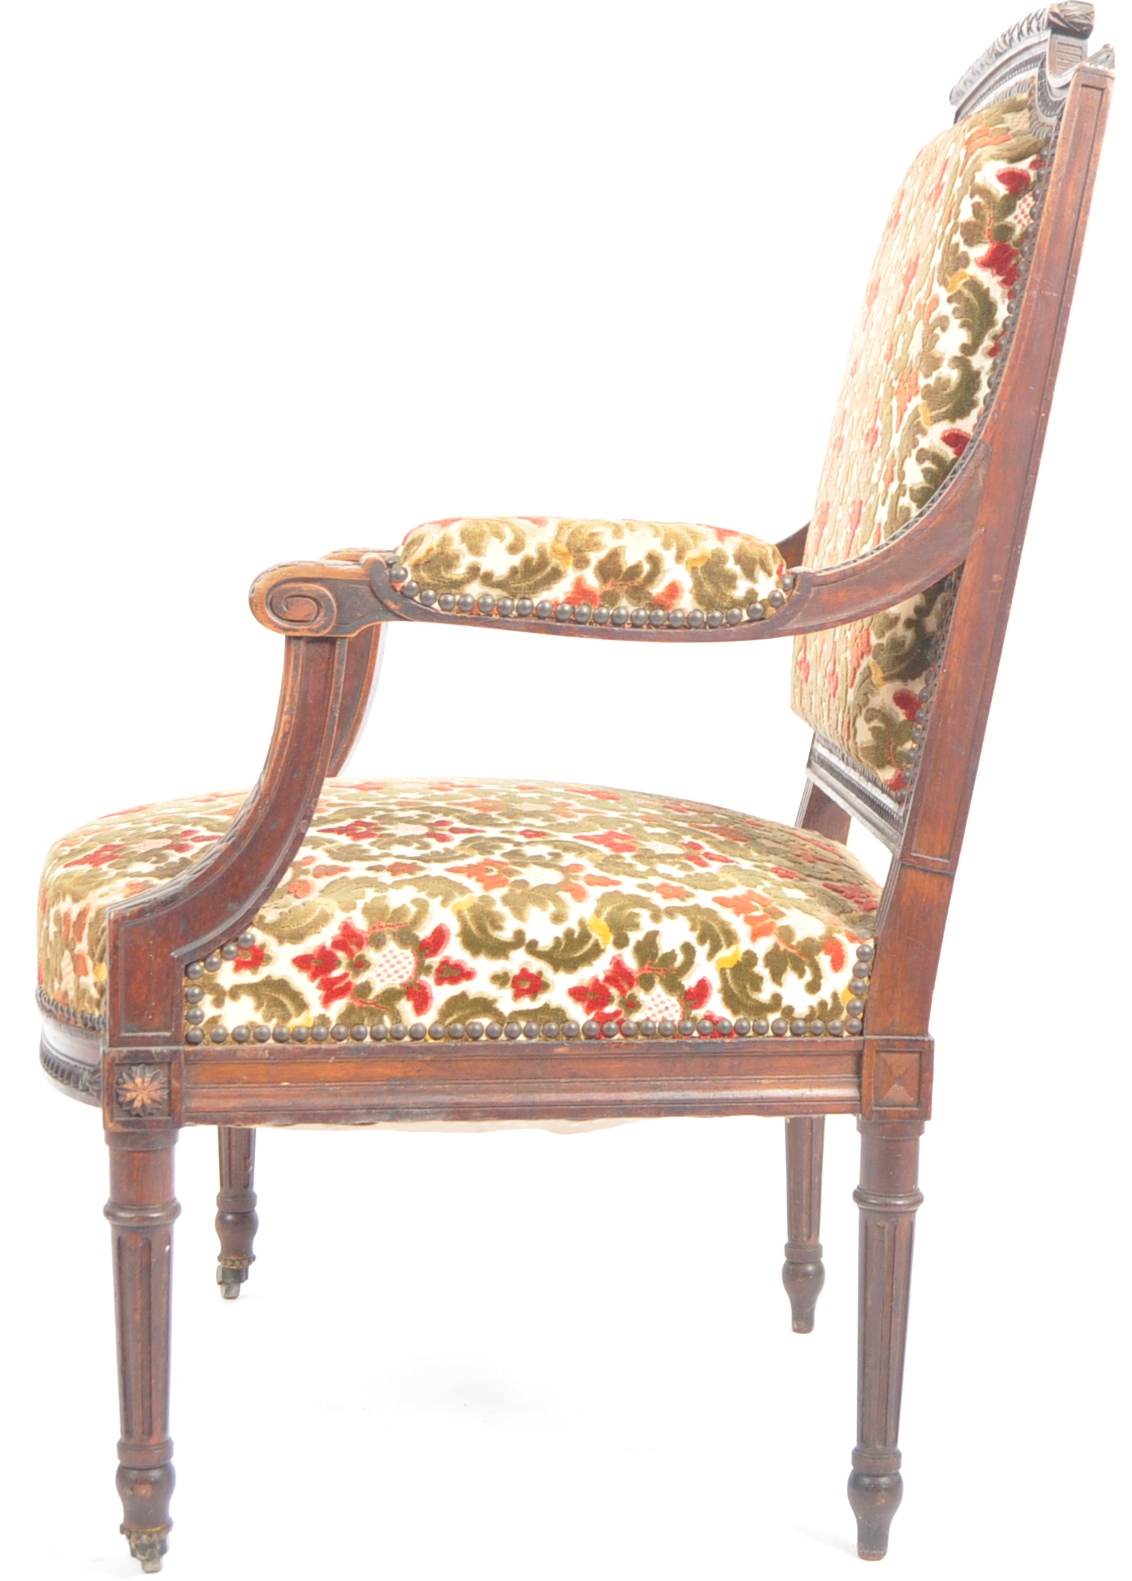 PAIR OF 19TH CENTURY FRENCH LOUIS REVIVAL FAUTEUIL ARMCHAIRS - Image 8 of 8